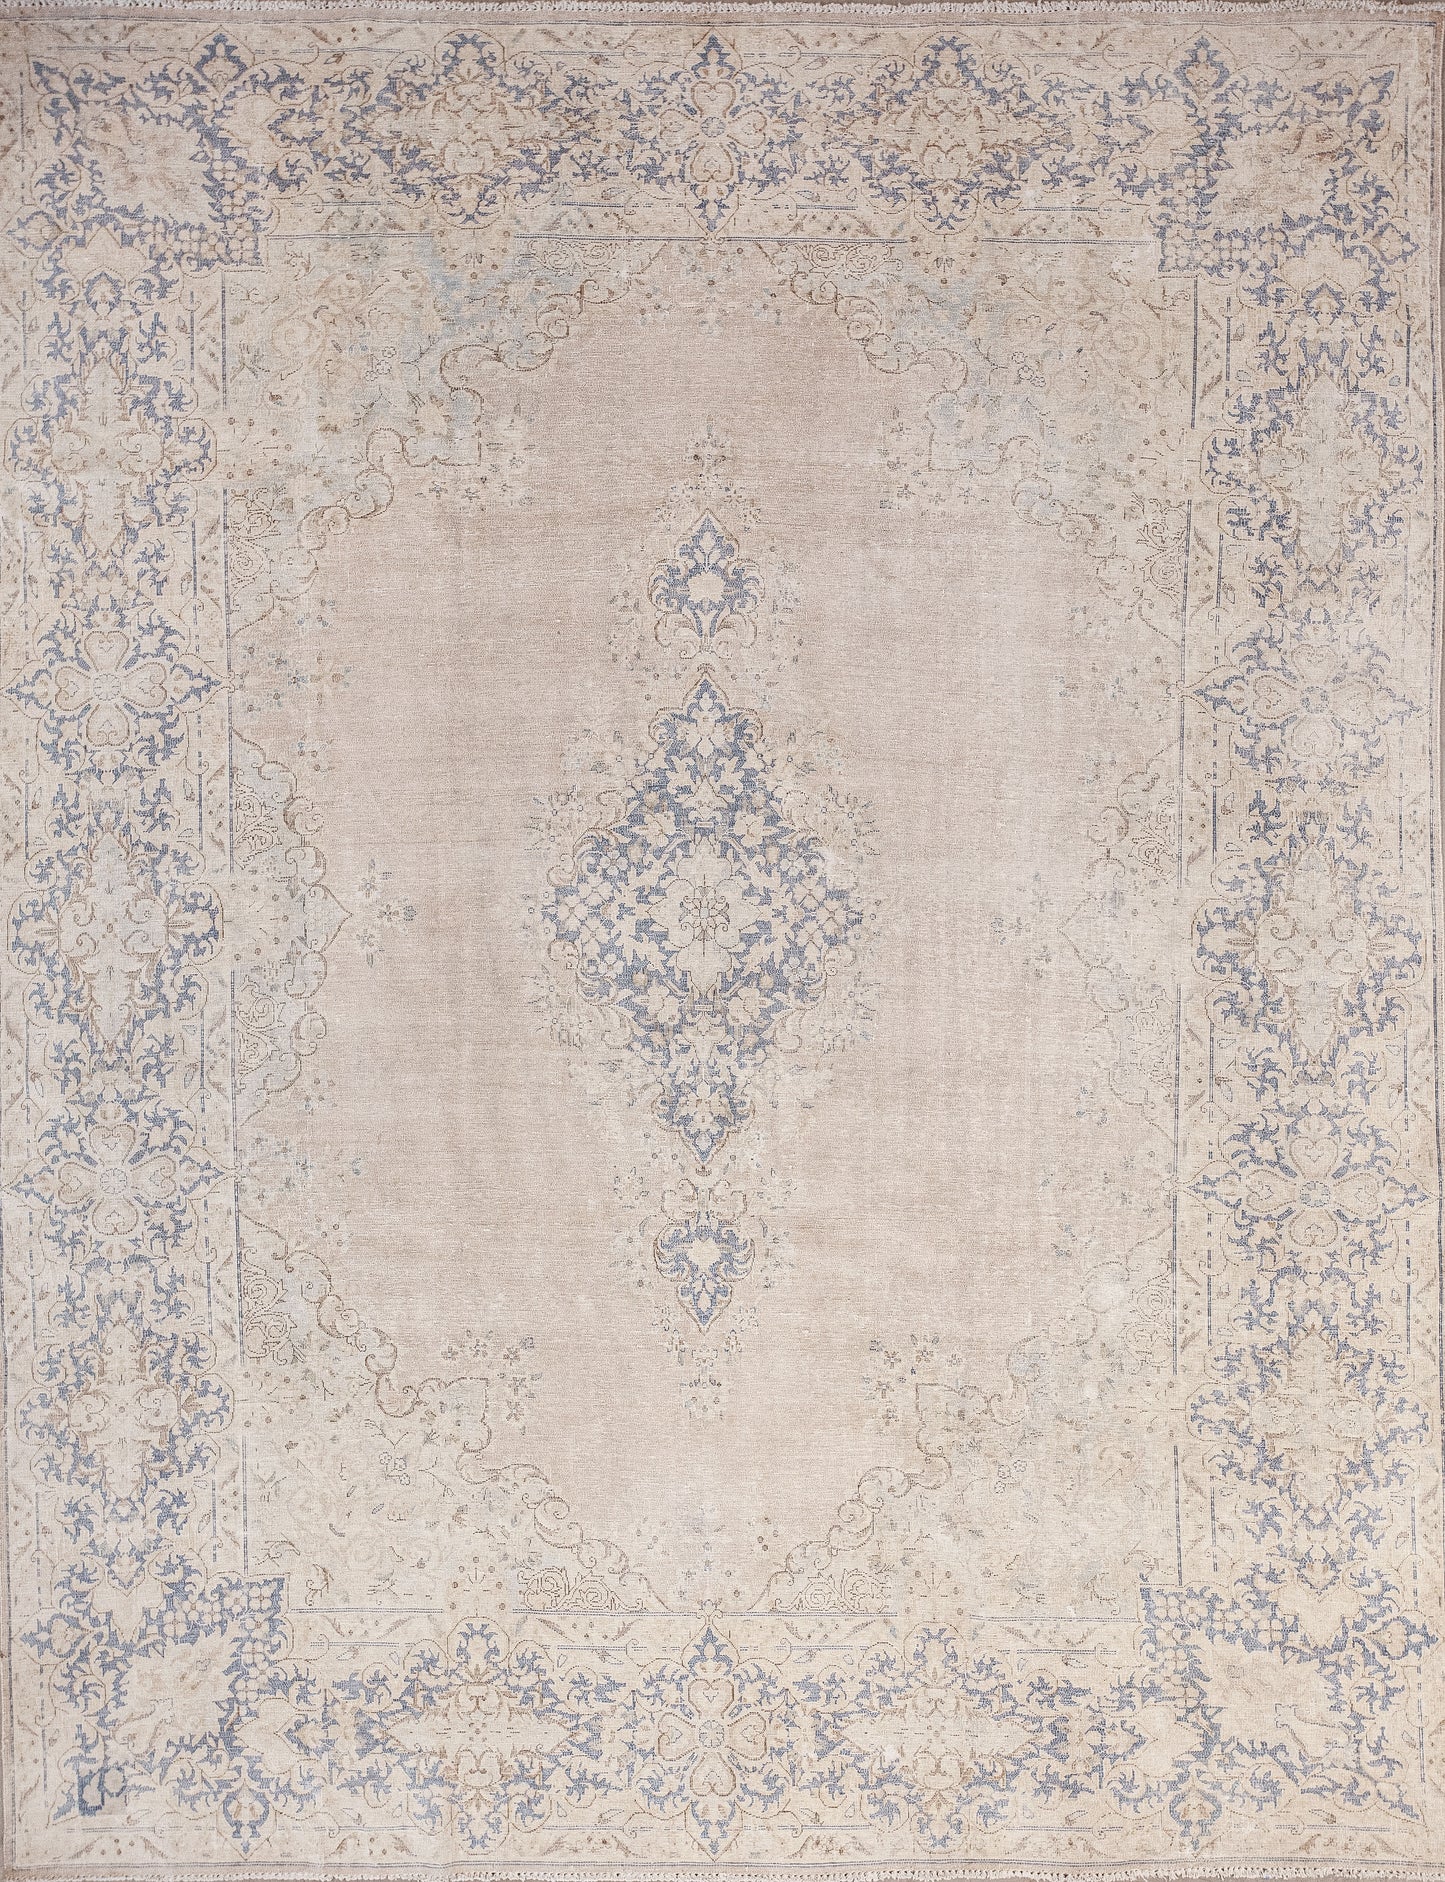 This natural rug comes with a simple design. The color palette has linen background, blue pattern, and brown outlines.